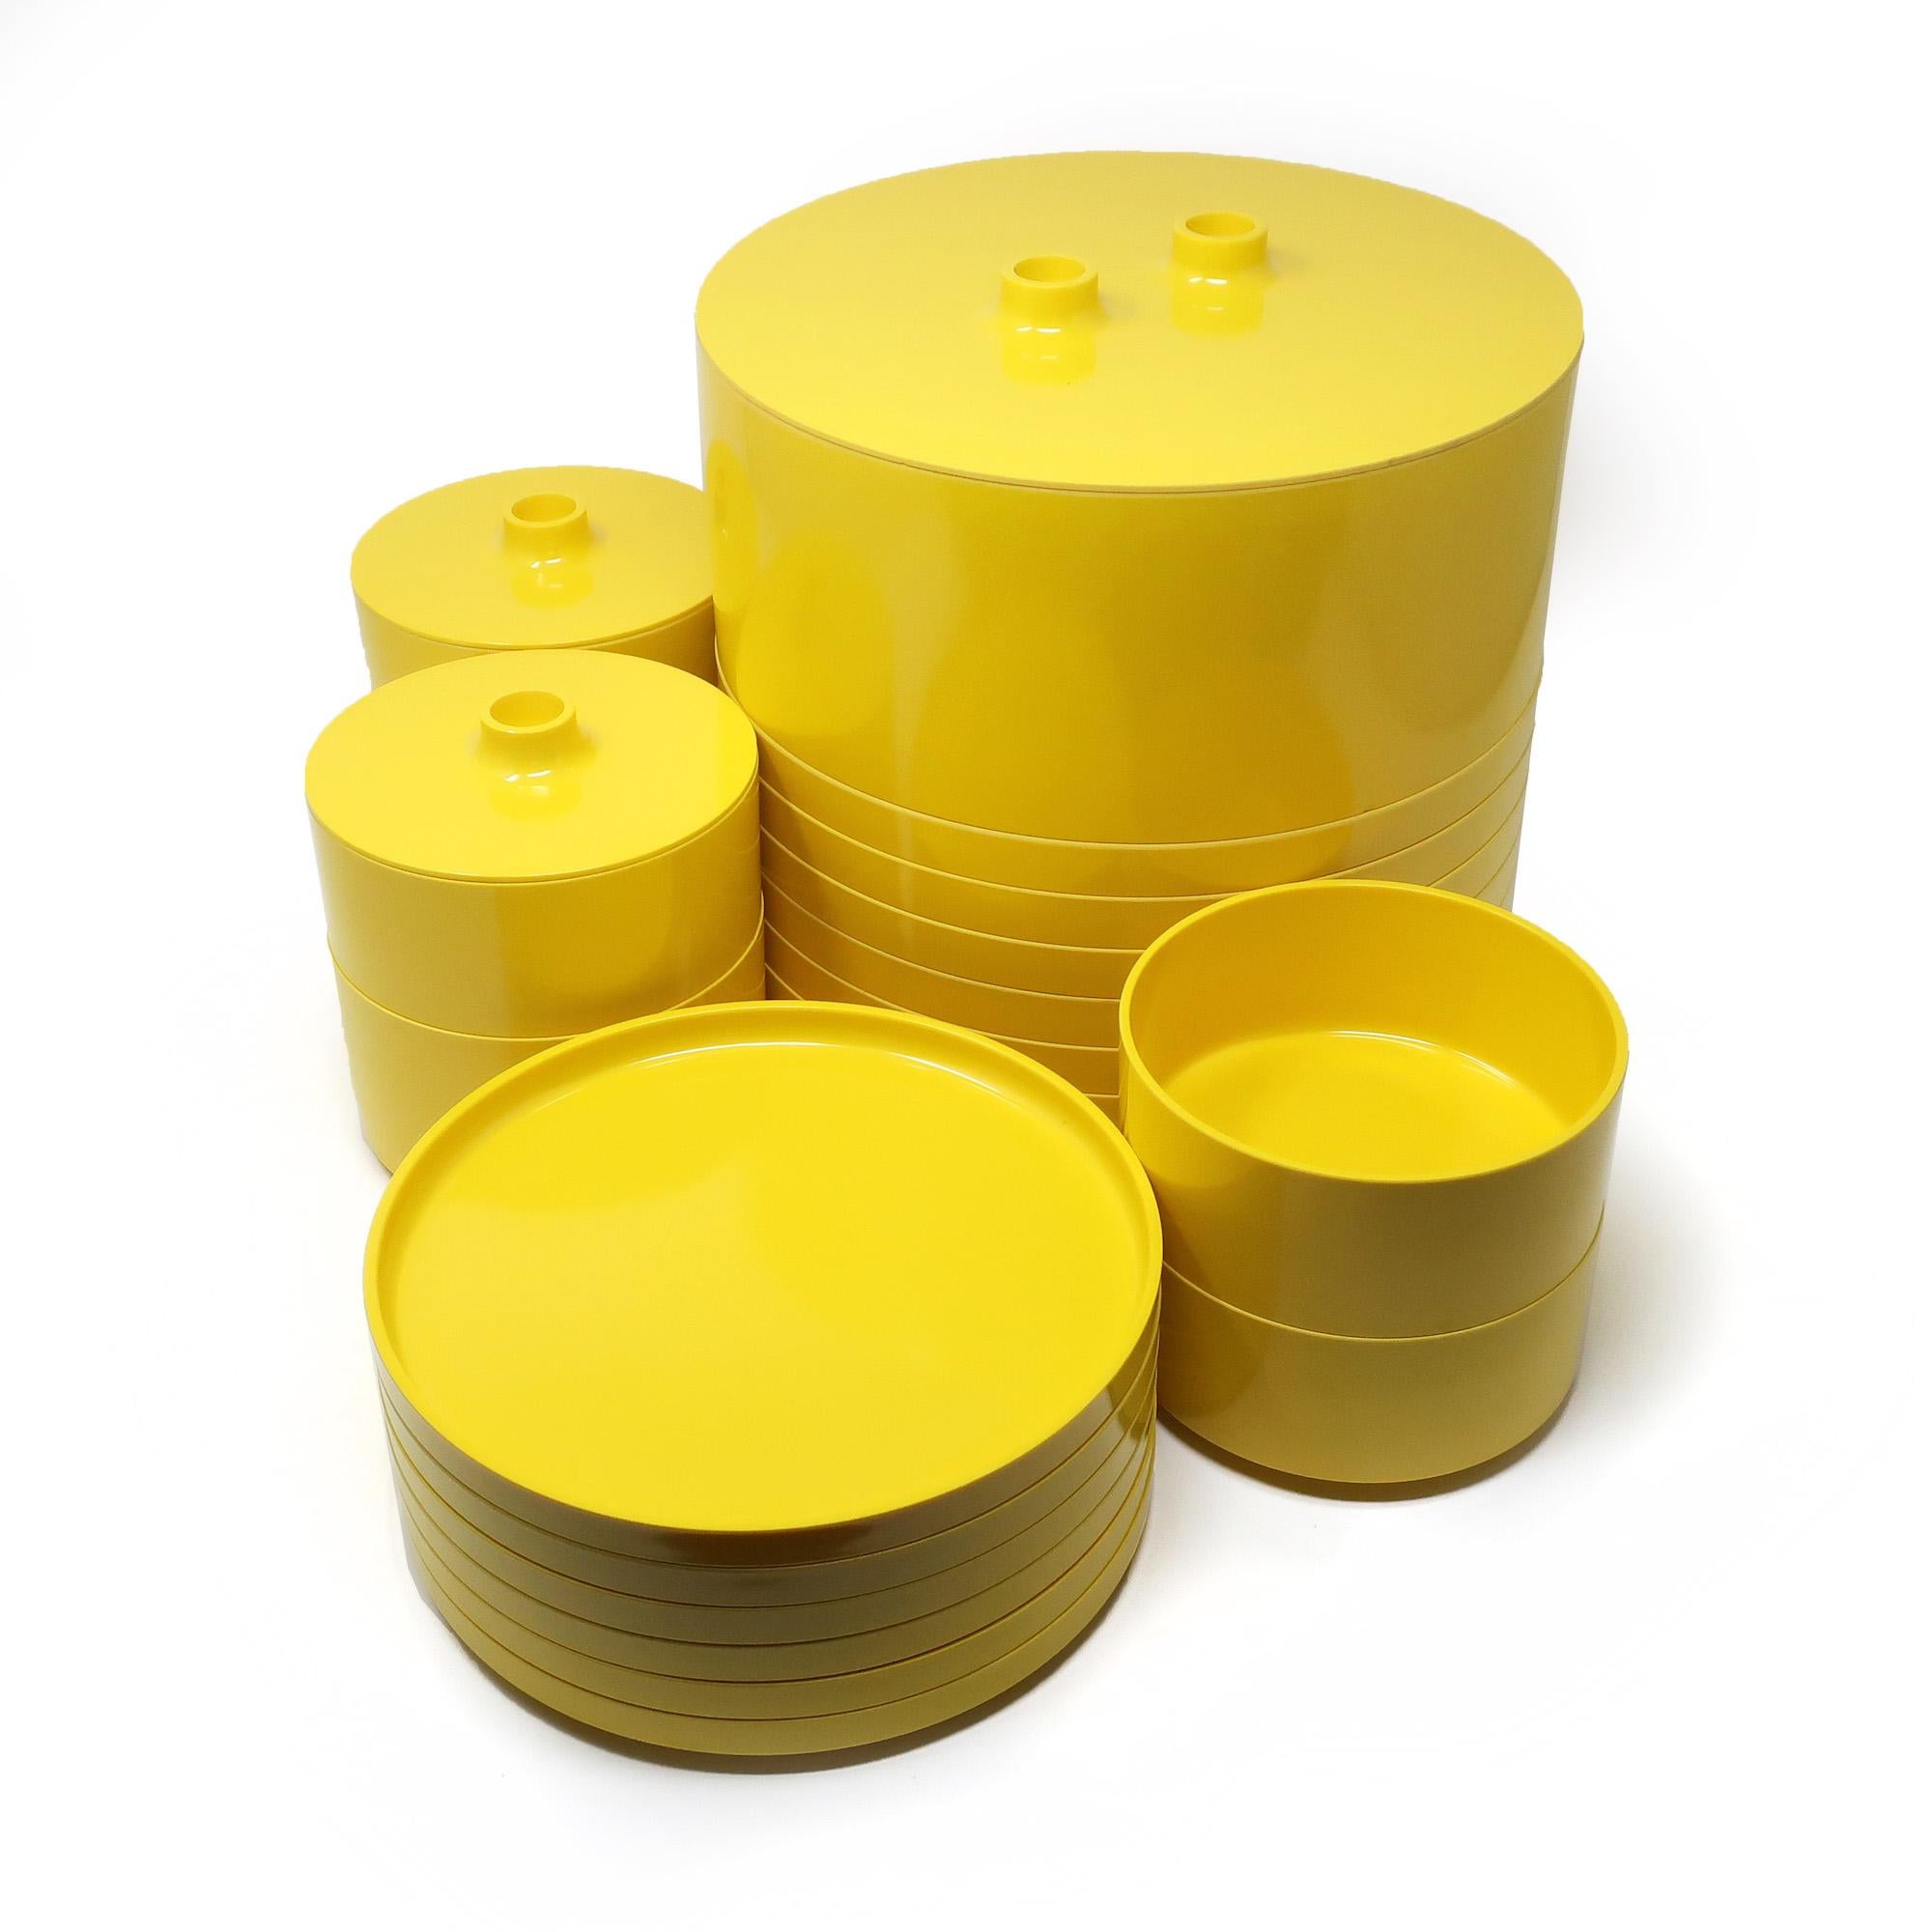 Plastic Yellow Dinnerware by Vignelli for Heller, Service for 6